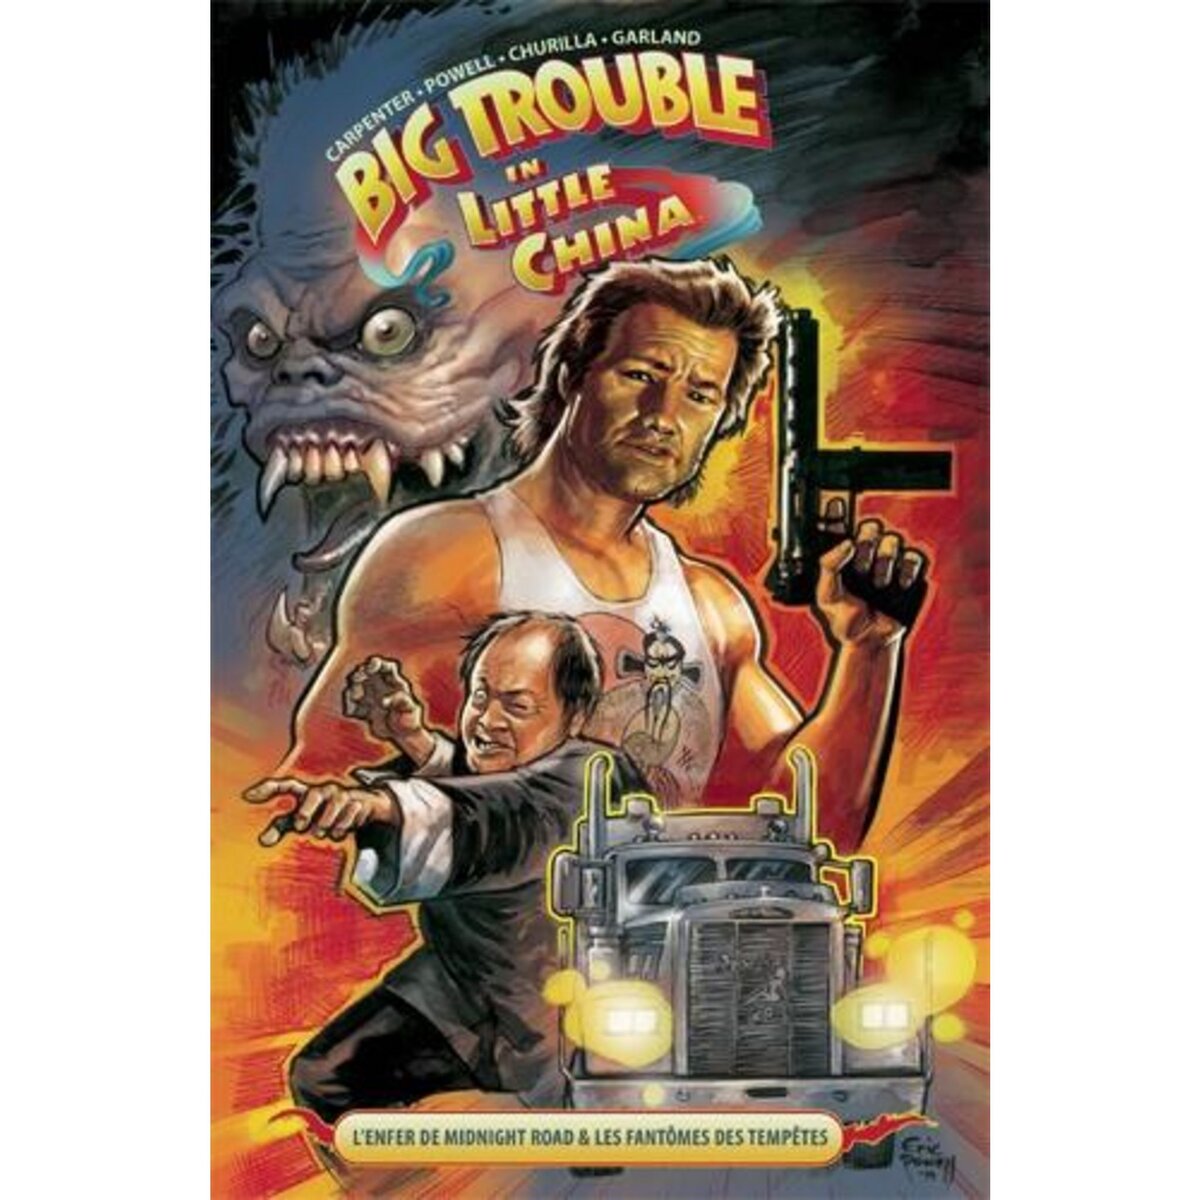  BIG TROUBLE IN LITTLE CHINA TOME 1 : L'ENFER DE MIDNIGHT ROAD & LES FANTOMES DES TEMPETES, Powell Eric